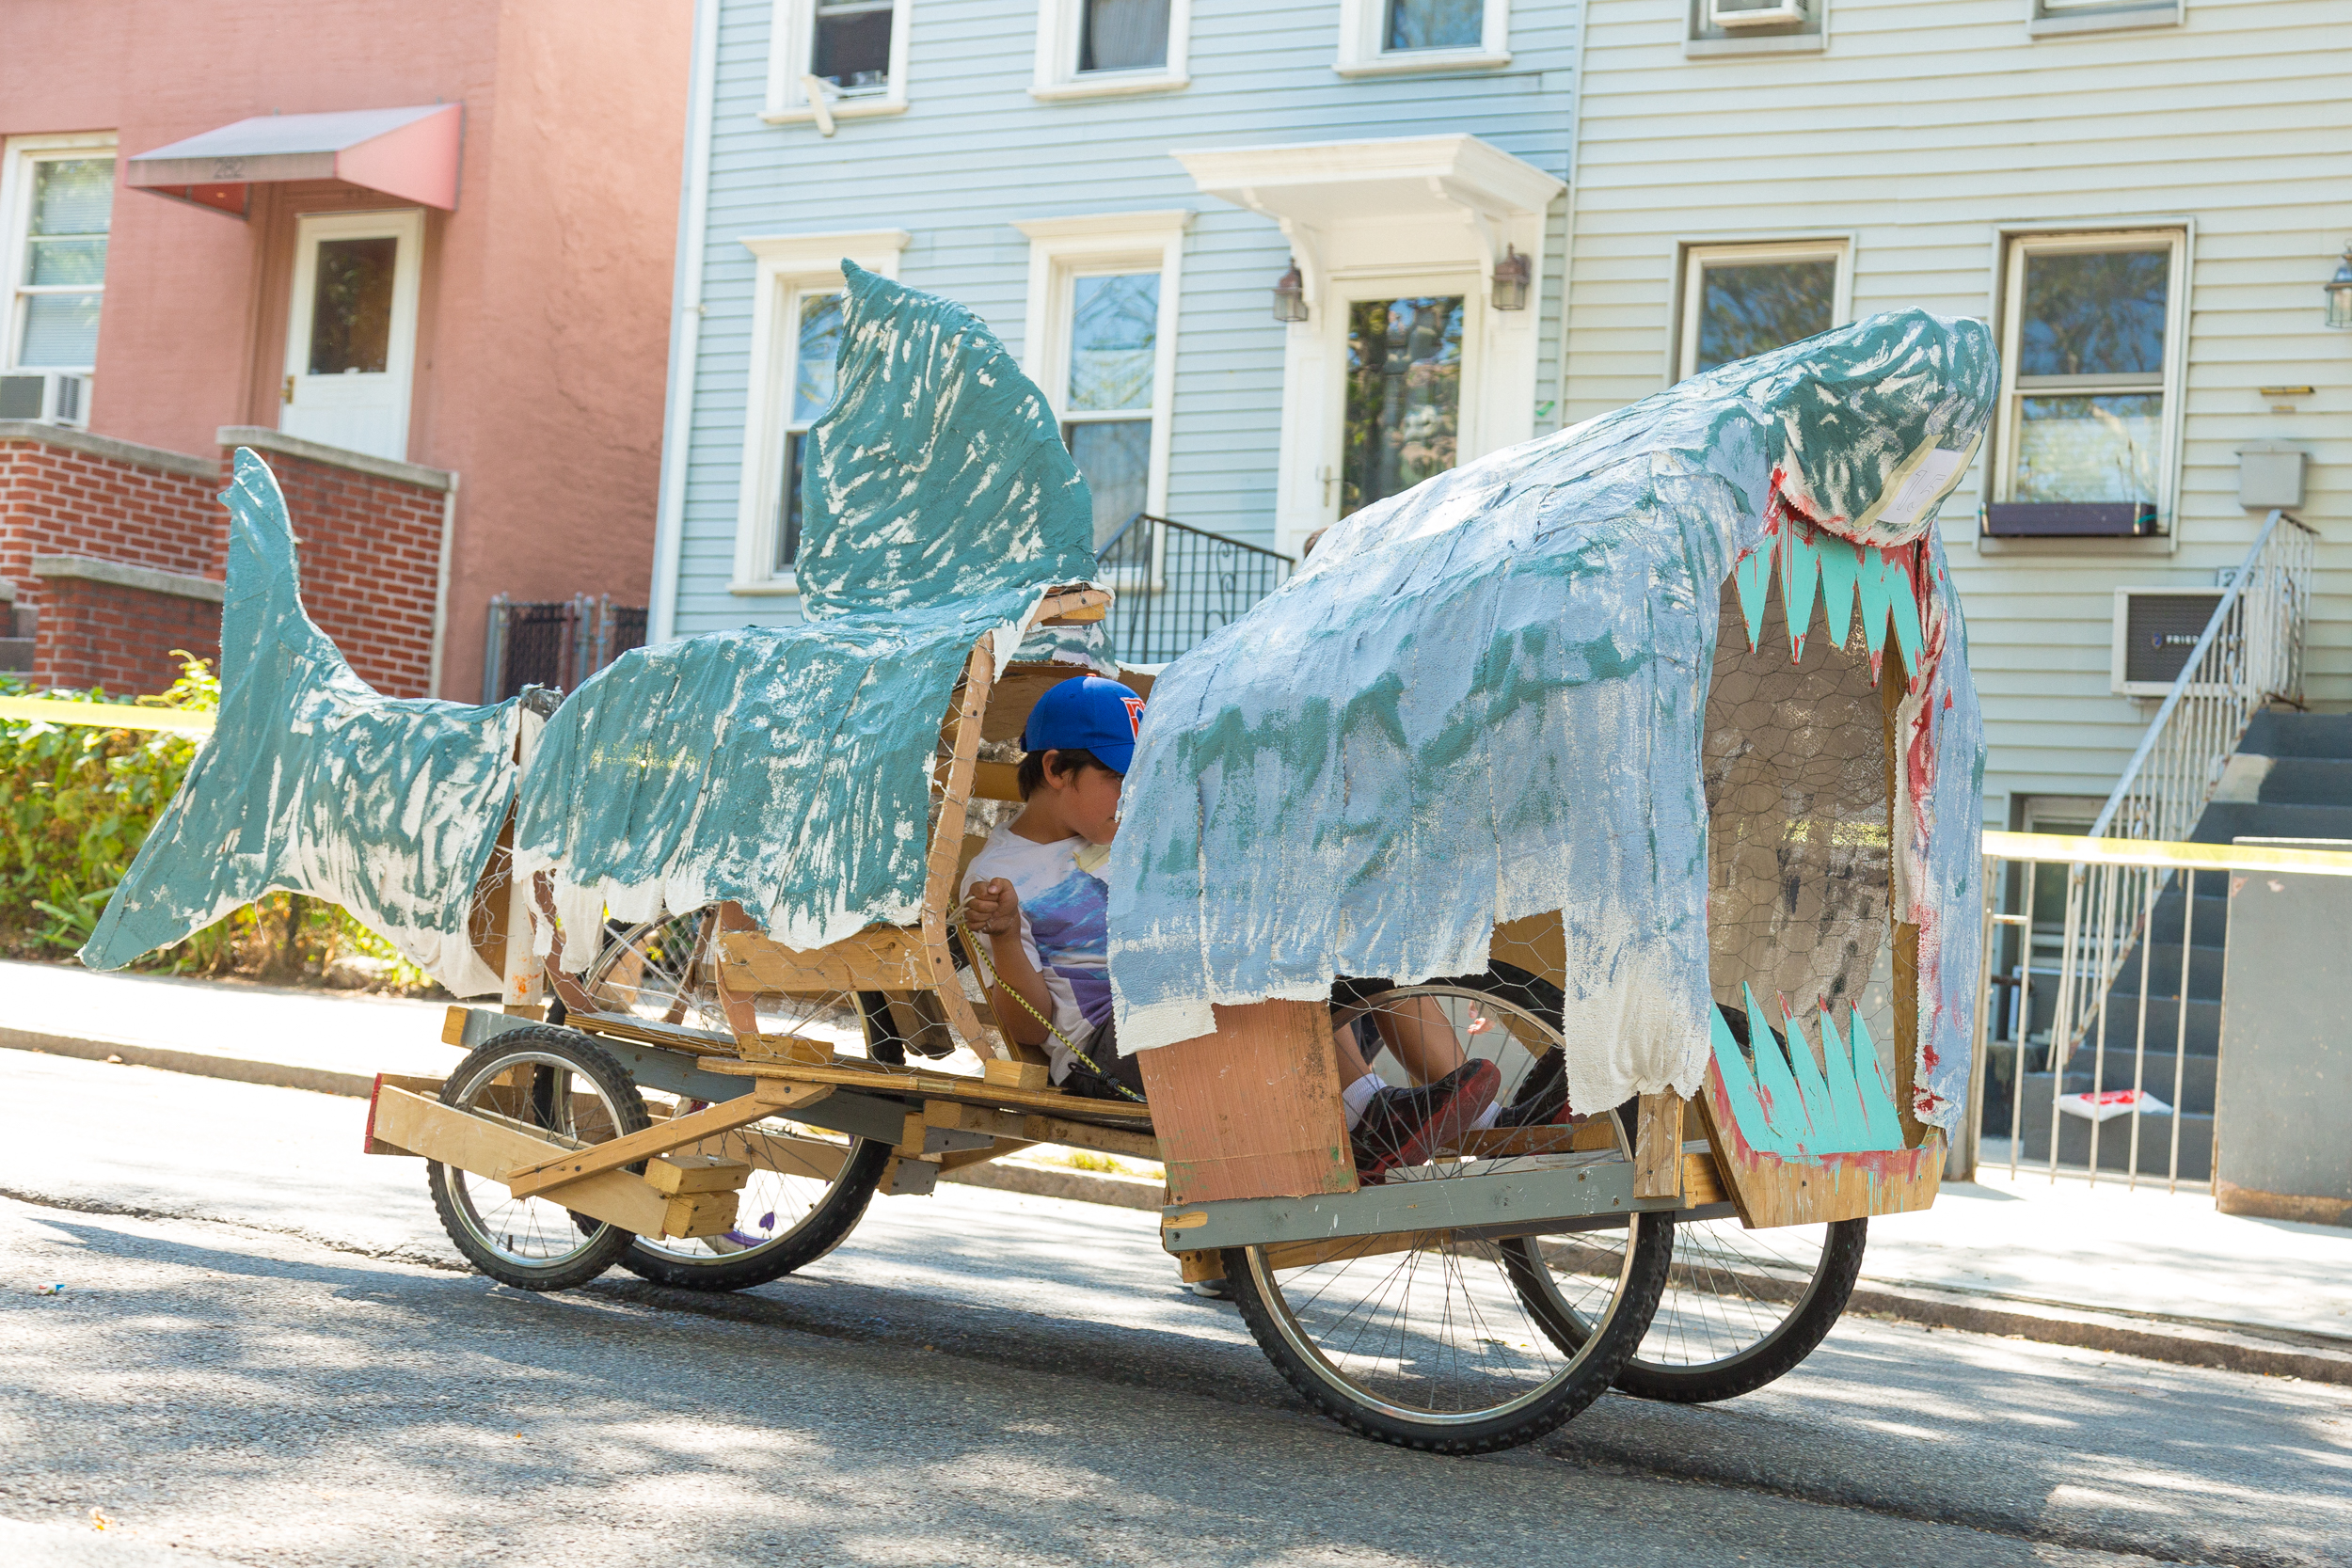 10th Annual South Slope Soap Box Derby